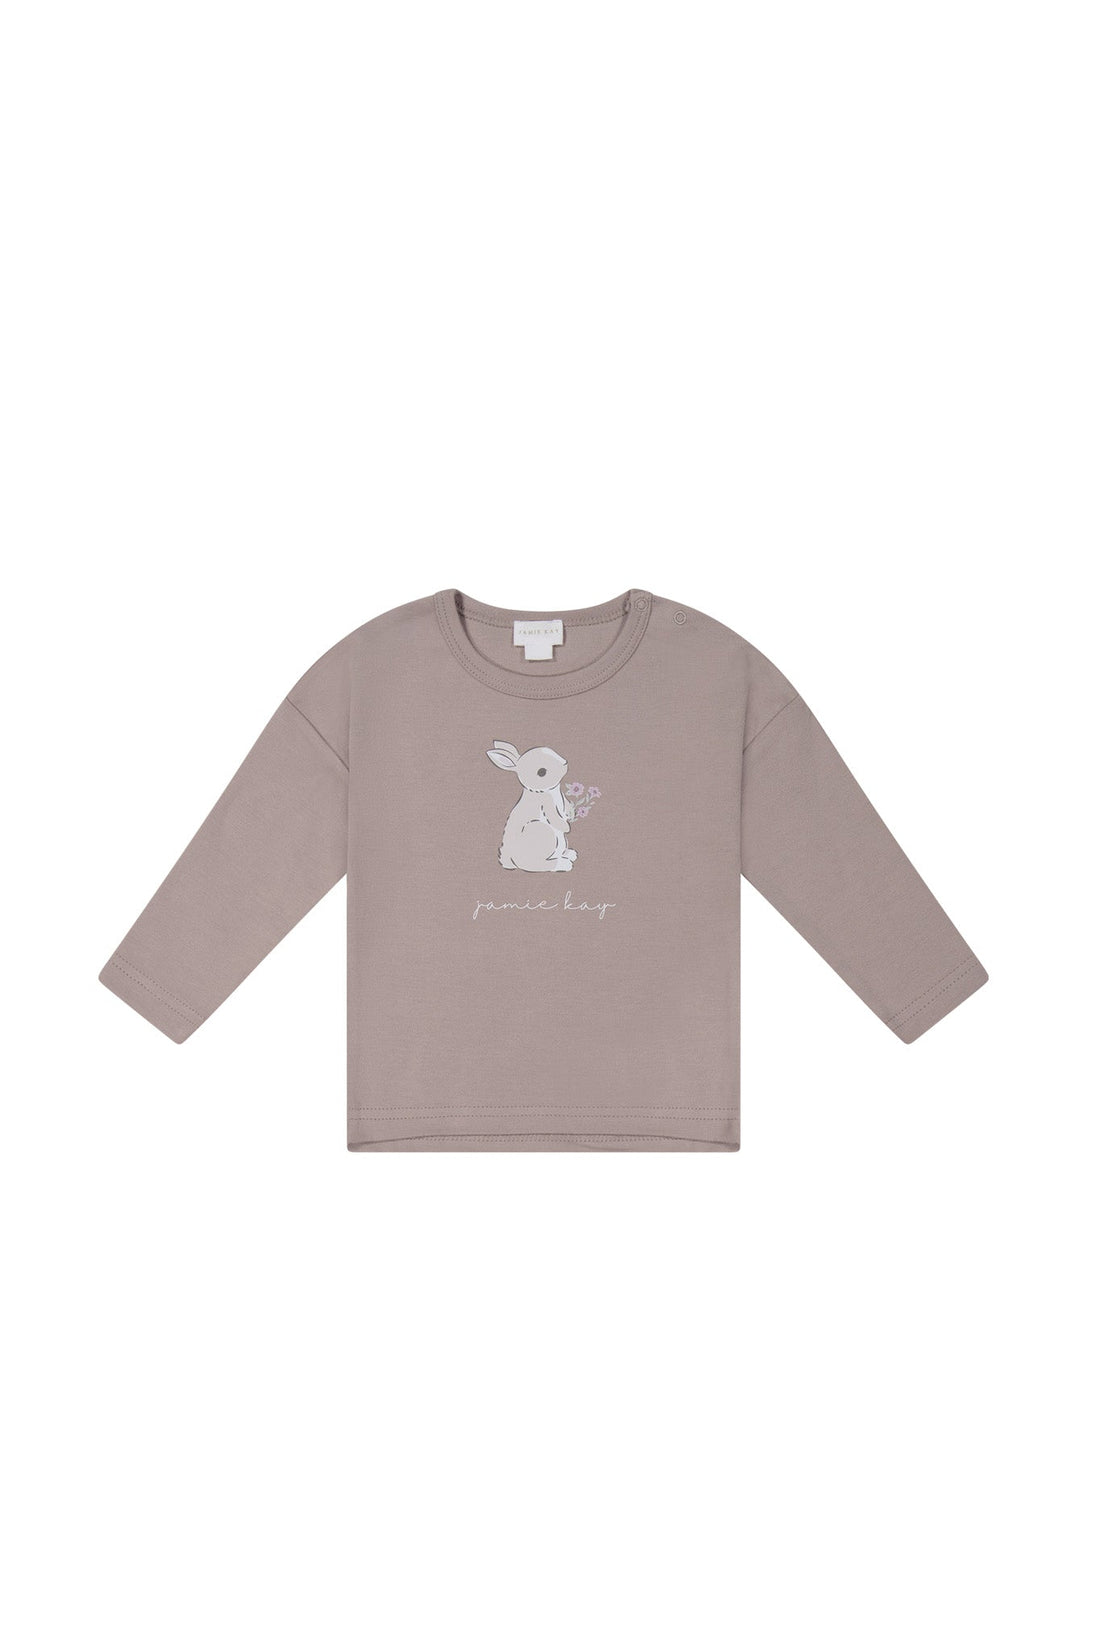 Pima Cotton Marley Long Sleeve Top - Lavender Musk Childrens Top from Jamie Kay USA